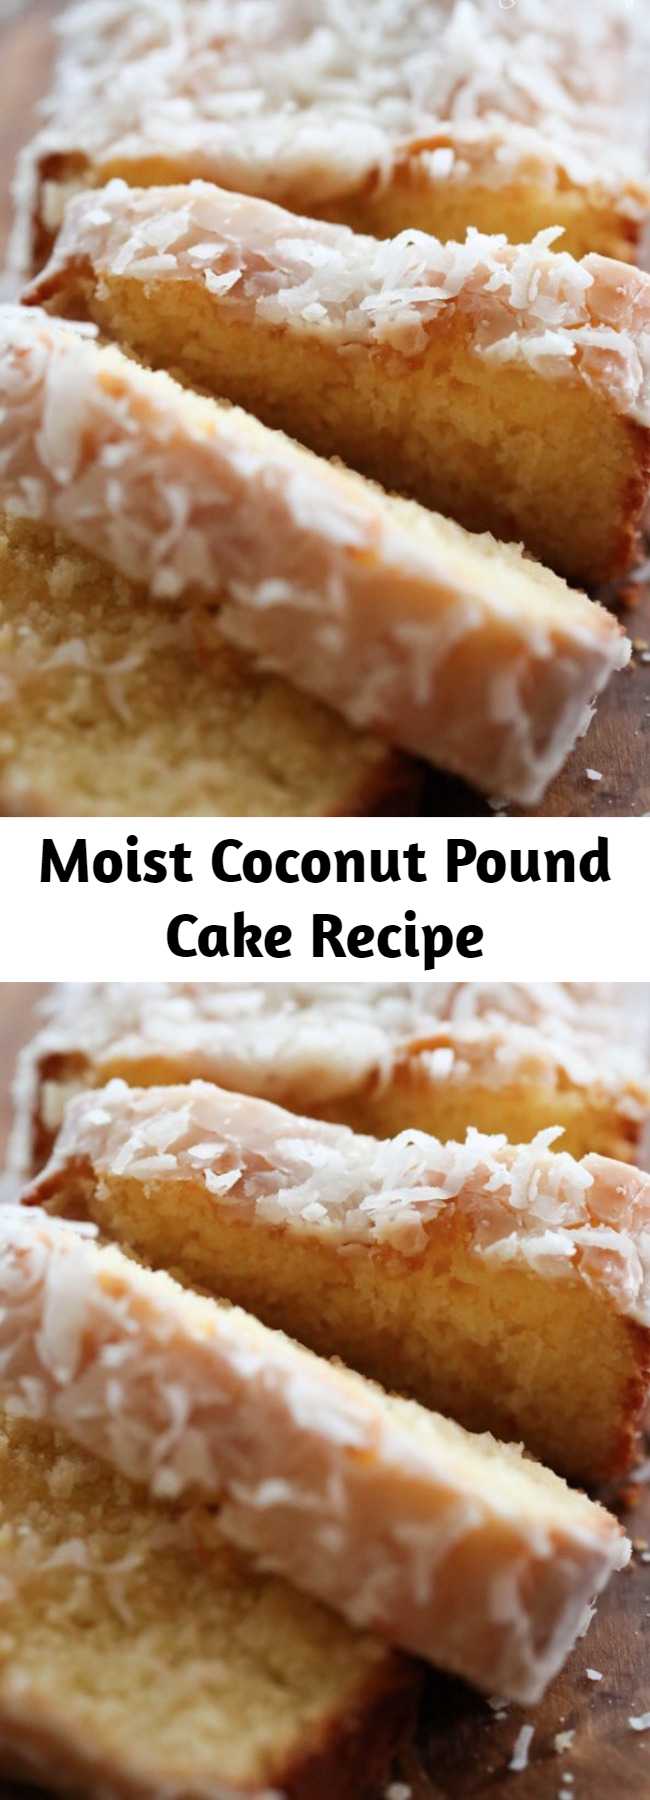 Moist Coconut Pound Cake Recipe - This pound cake is SO moist and so delicious! It will quickly become a new favorite!